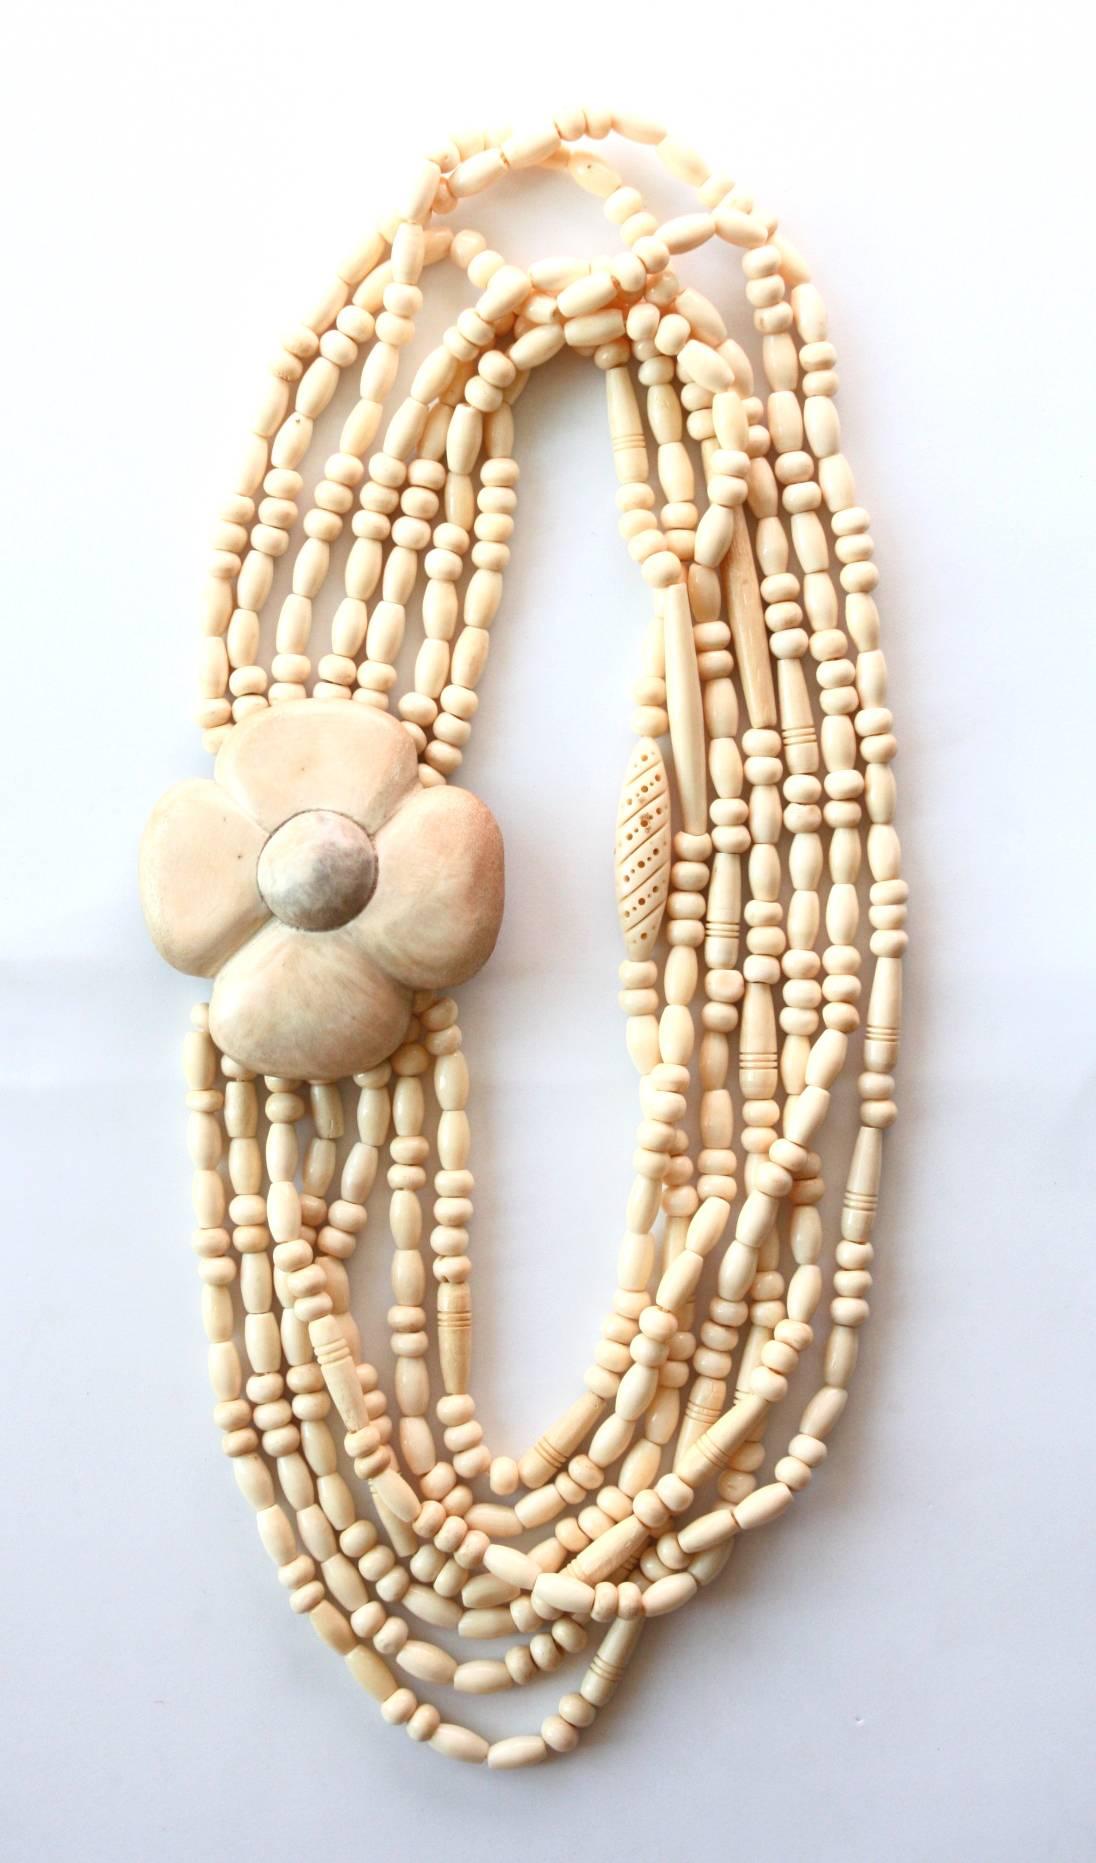 Antiques Bone Beads, with a Flower on the side, very original and artistic one.
All Giulia Colussi jewelry is new and has never been previously owned or worn. Each item will arrive at your door beautifully gift wrapped in our boxes, put inside an